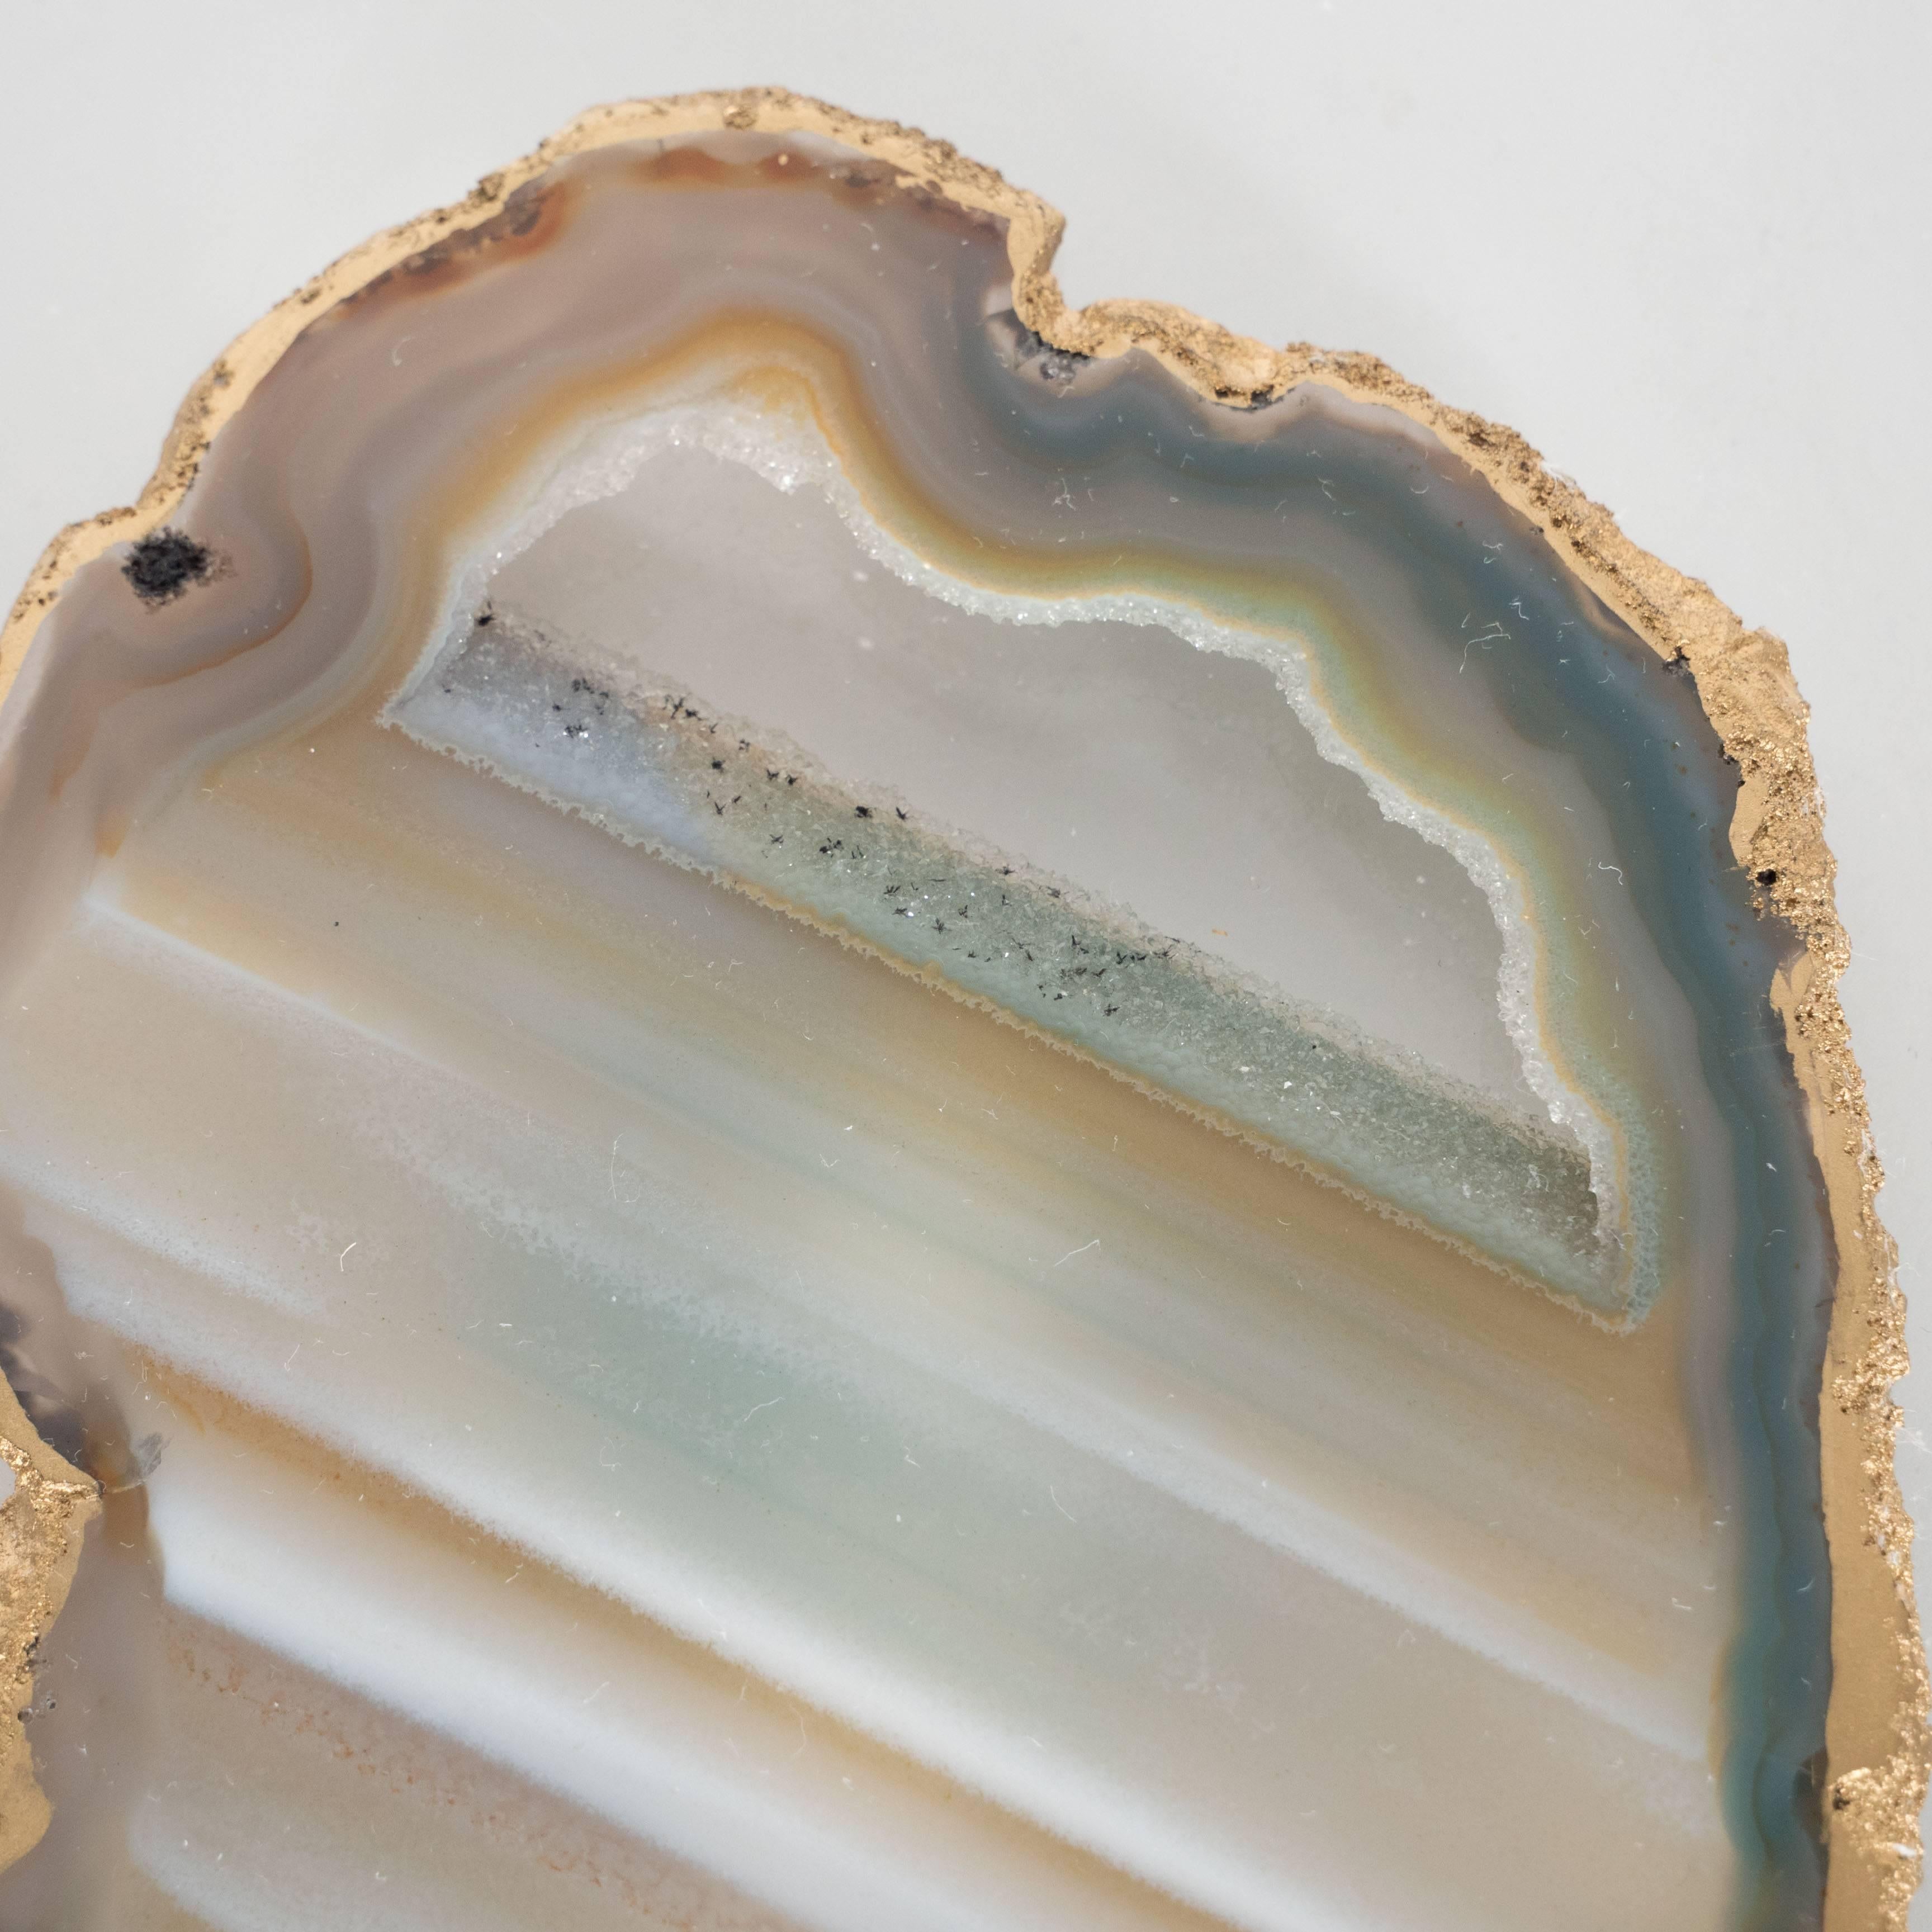 American Modernist Organic Sliced Agate and Lucite Desk Tray or Catch All